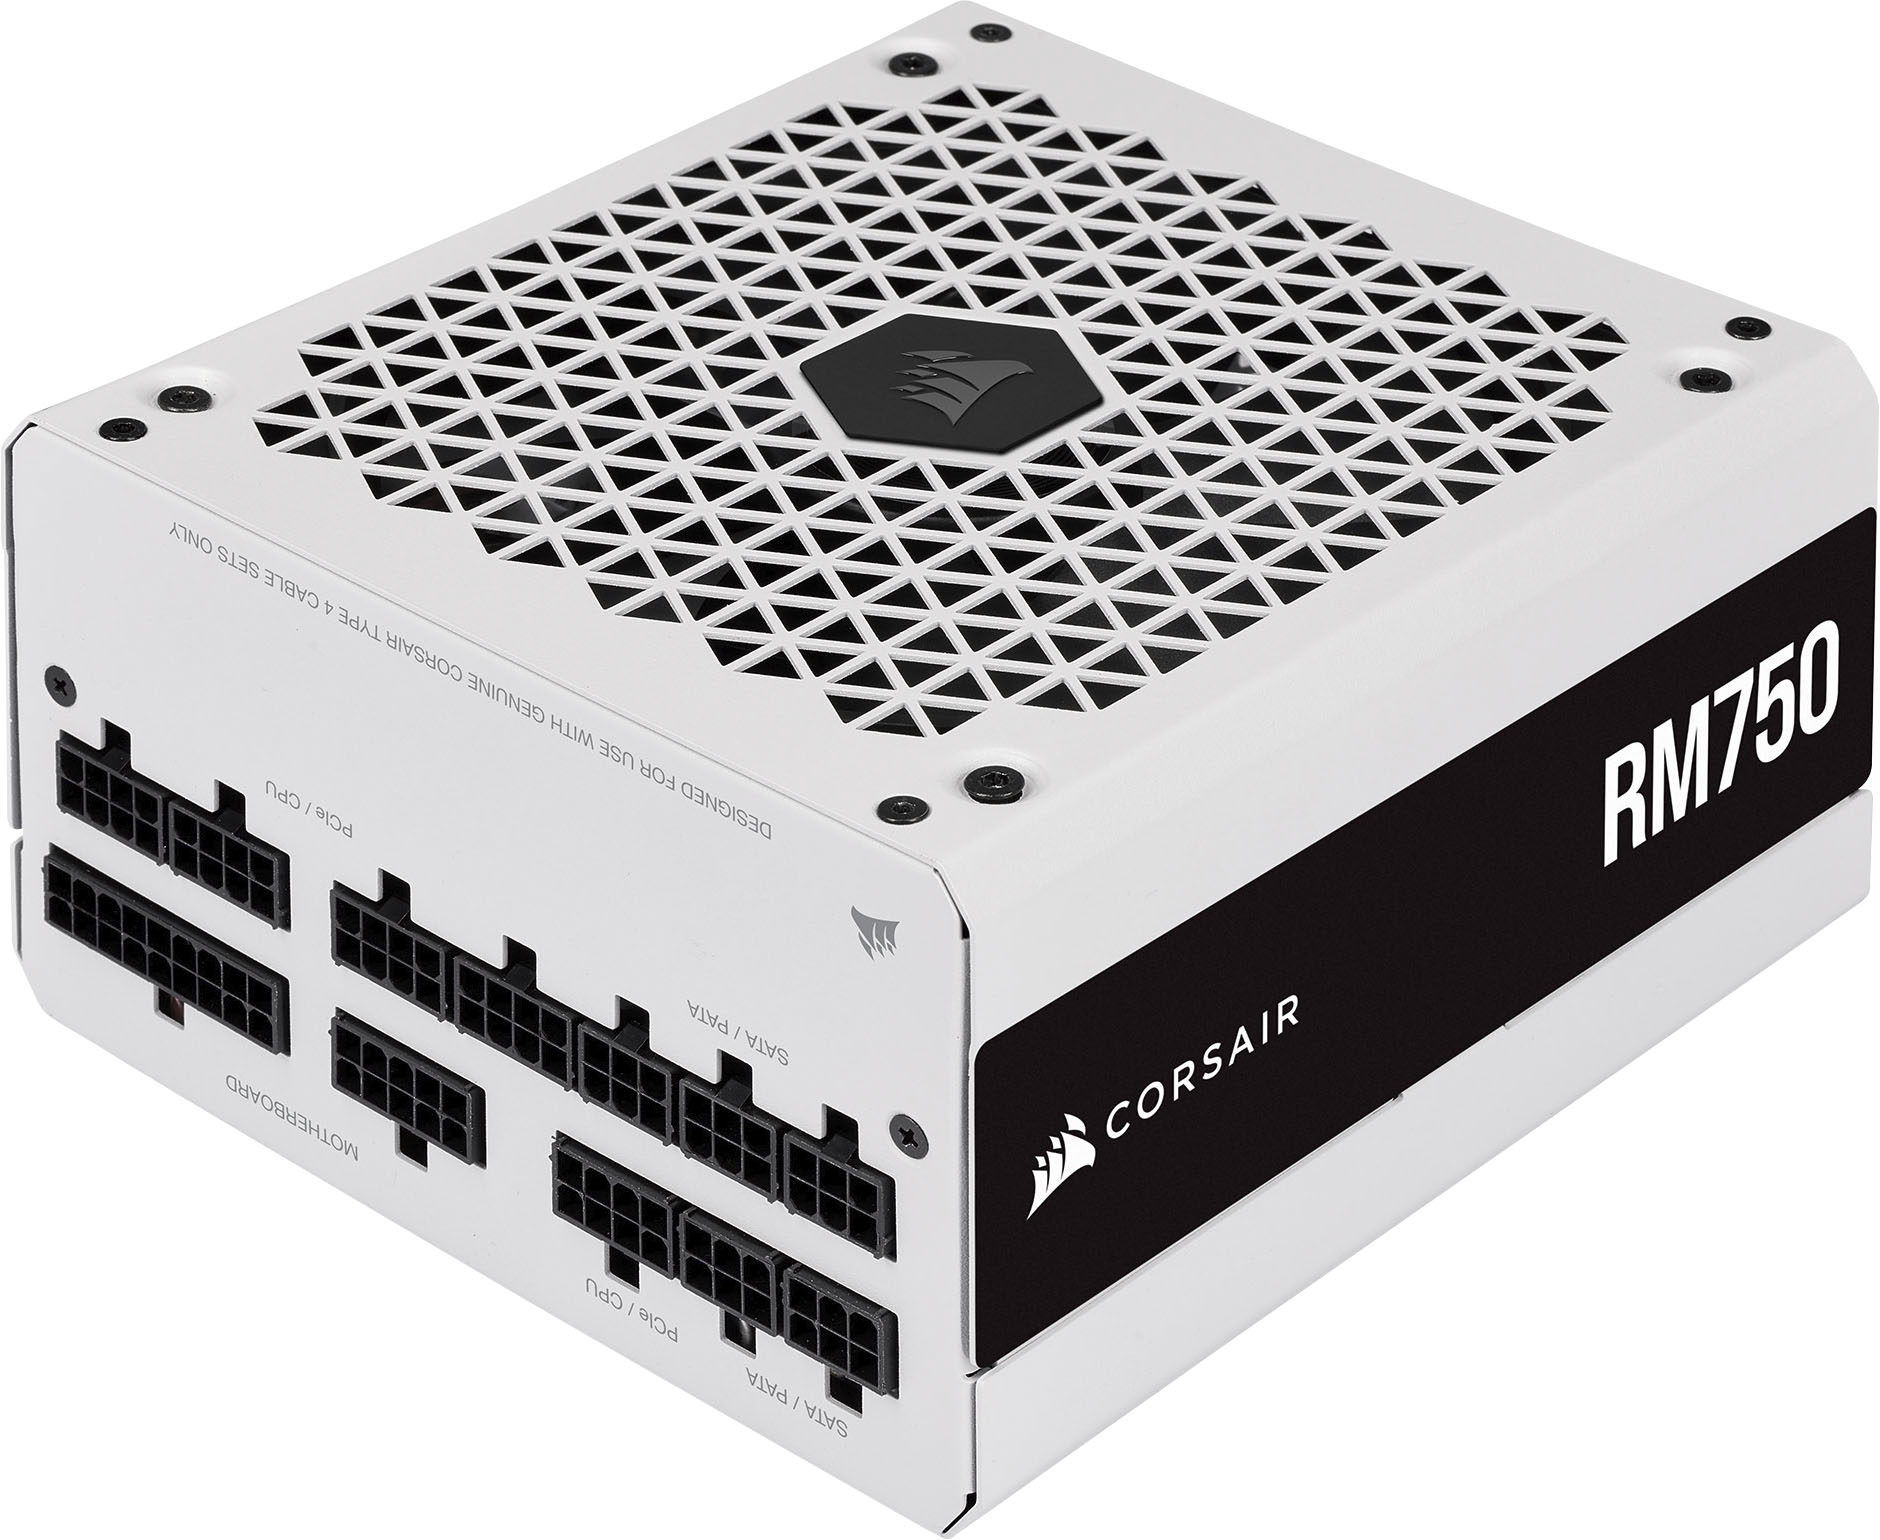 CORSAIR Series RM750 750W ATX 80 PLUS GOLD Certified Fully Modular Supply White CP-9020231-NA Best Buy